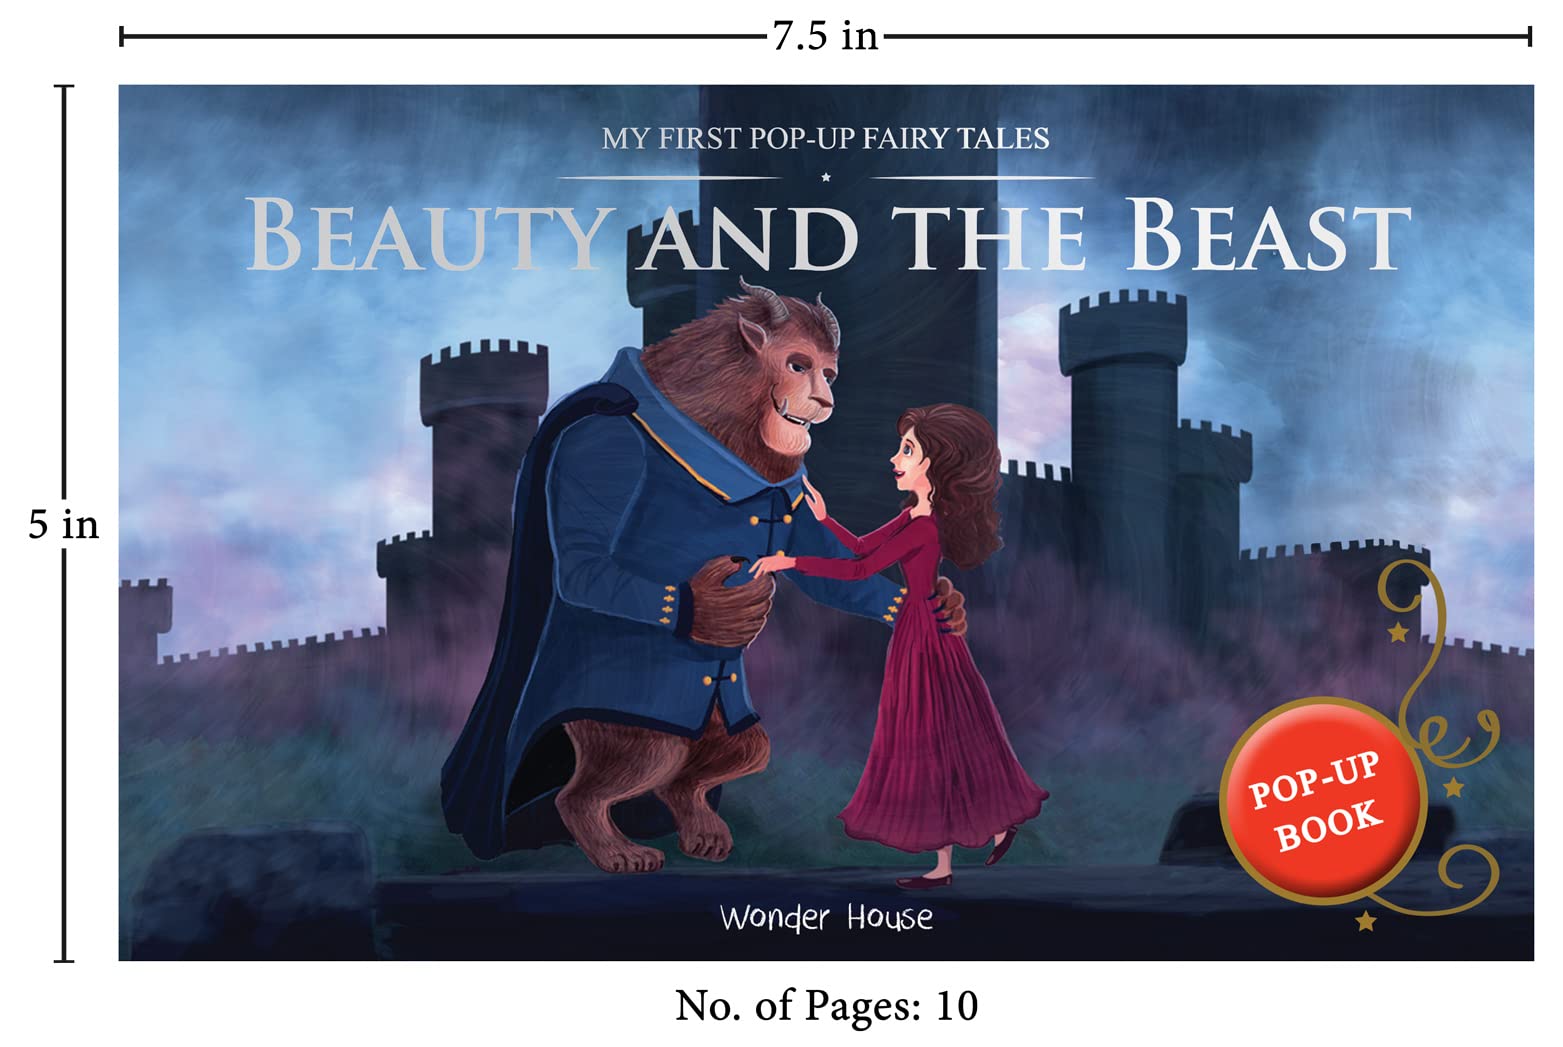 My First Pop-Up Fairy Tales - Beauty And The Beast